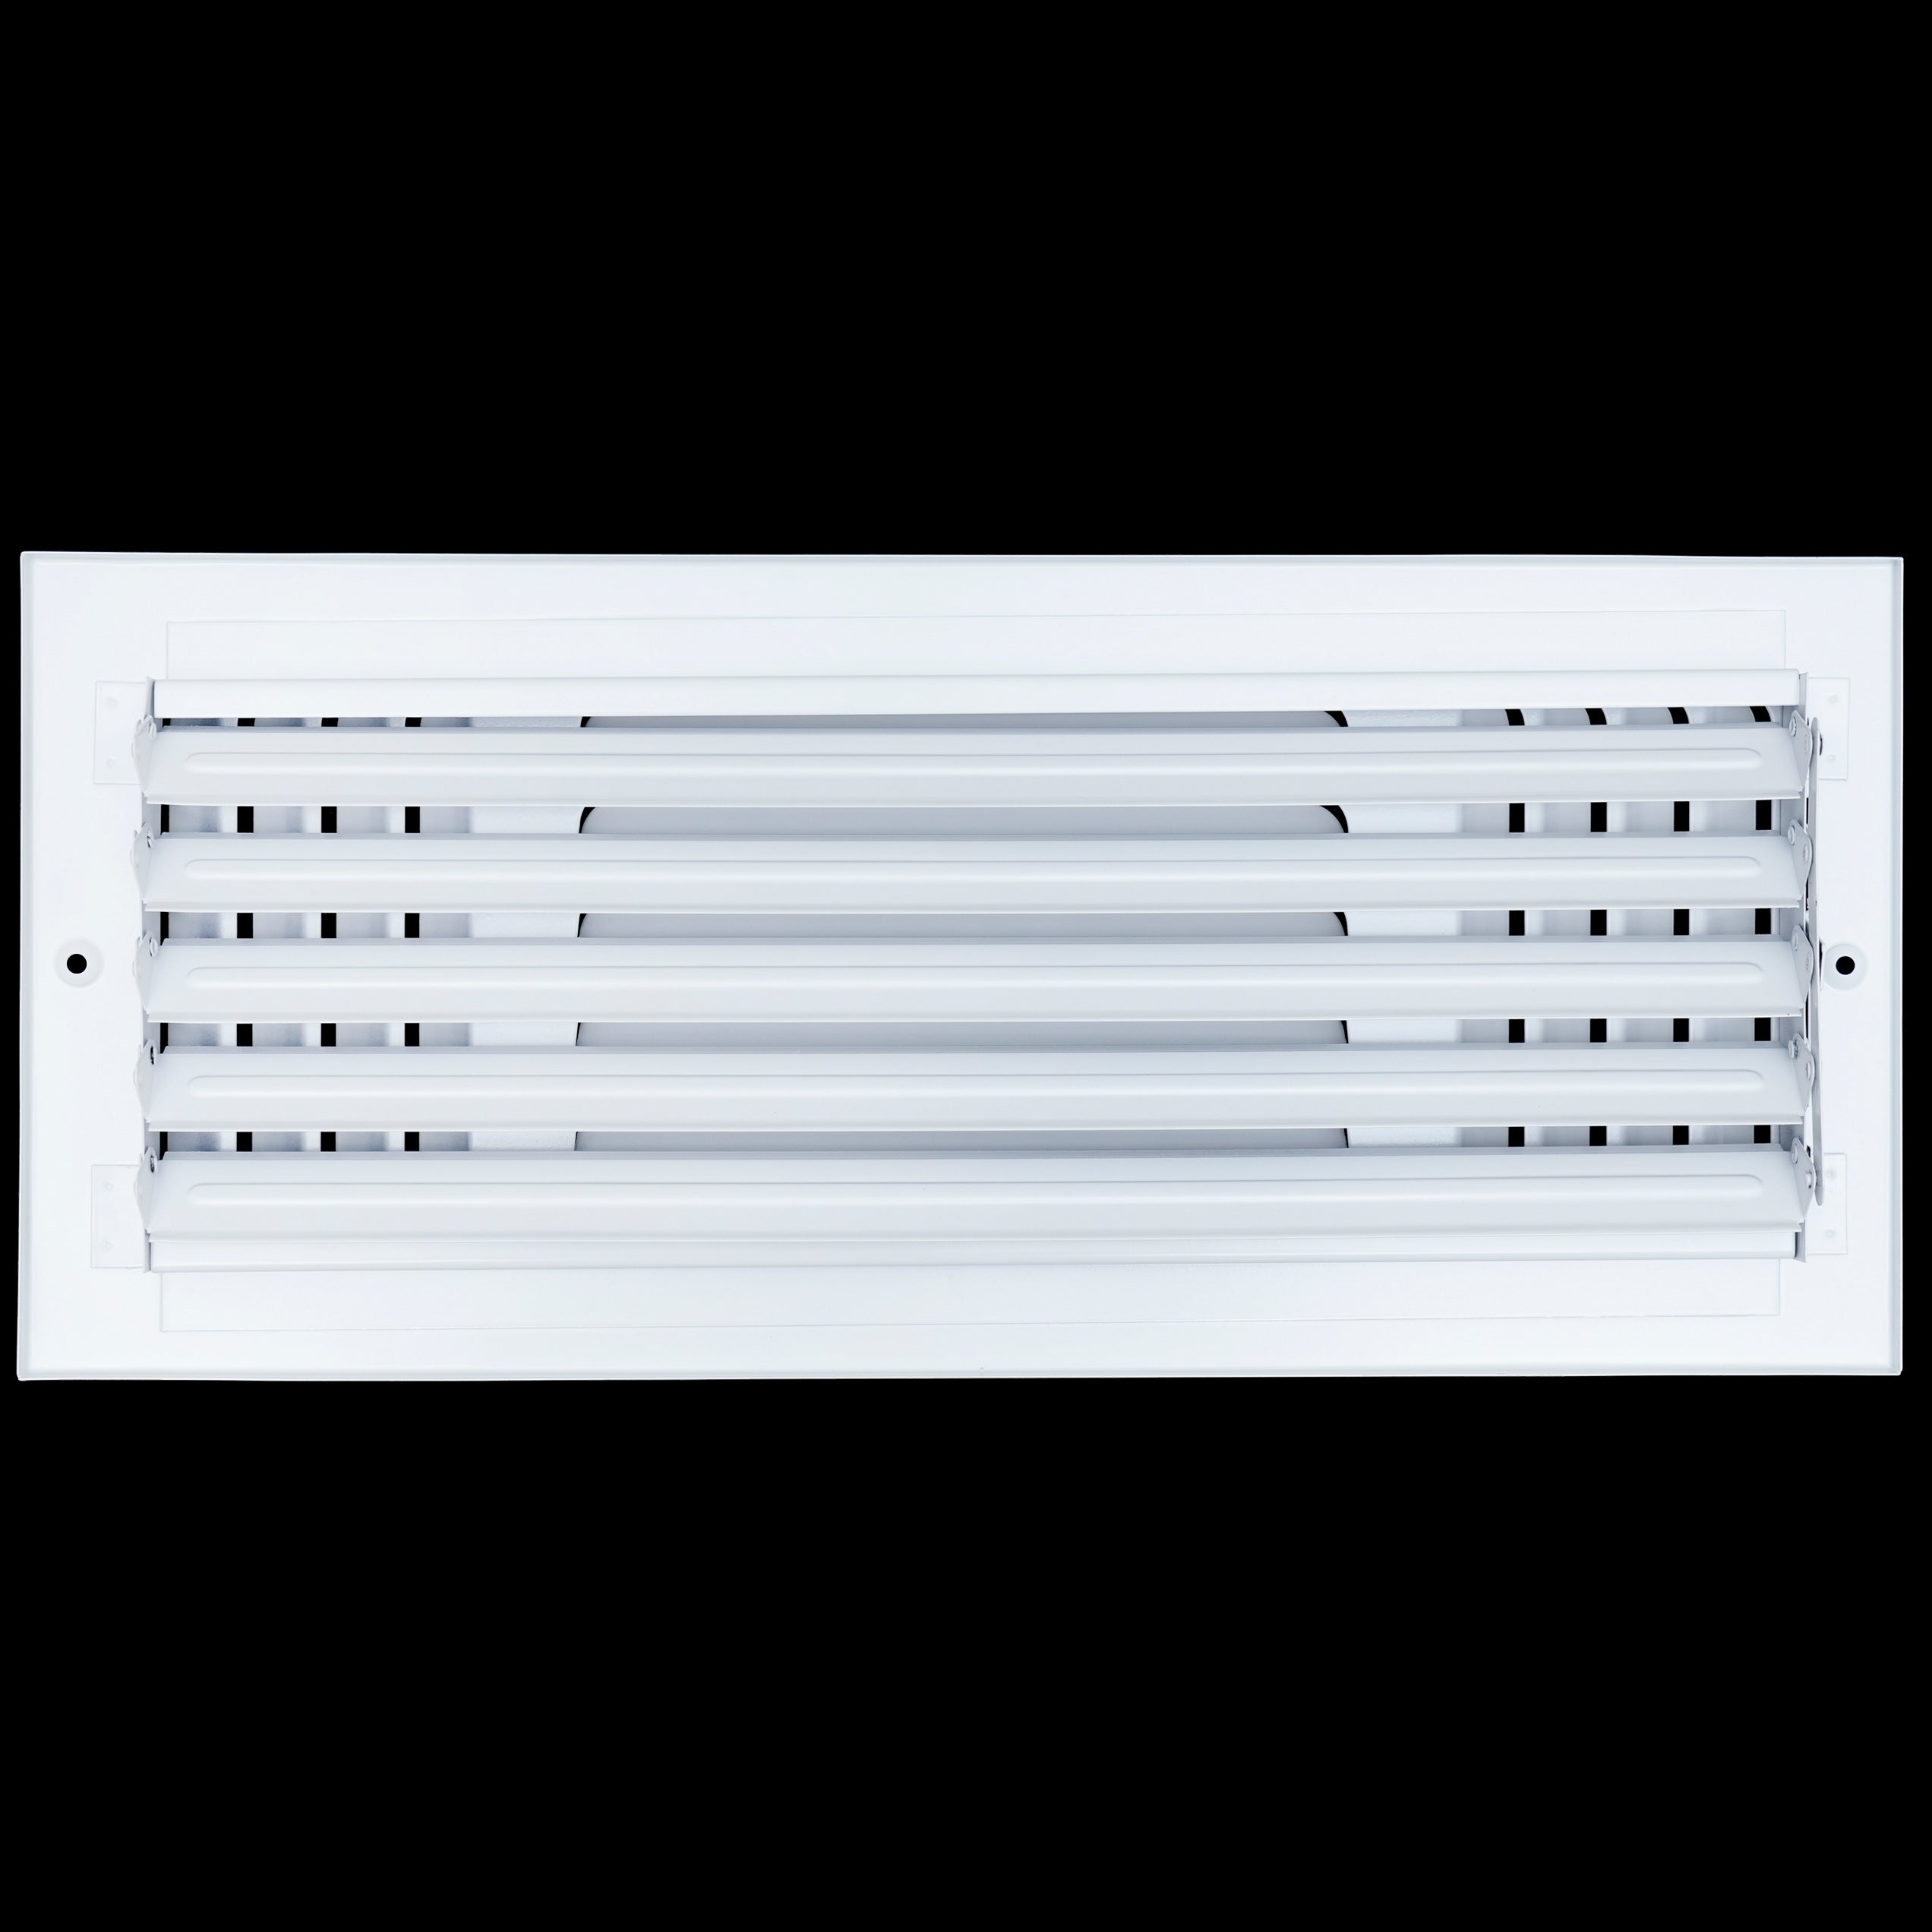 16"W x 6"H 3 WAY Fixed Curved Blade Air Supply Diffuser | Register Vent Cover Grill for Sidewall and Ceiling | White | Outer Dimensions: 17.75"W X 7.75"H